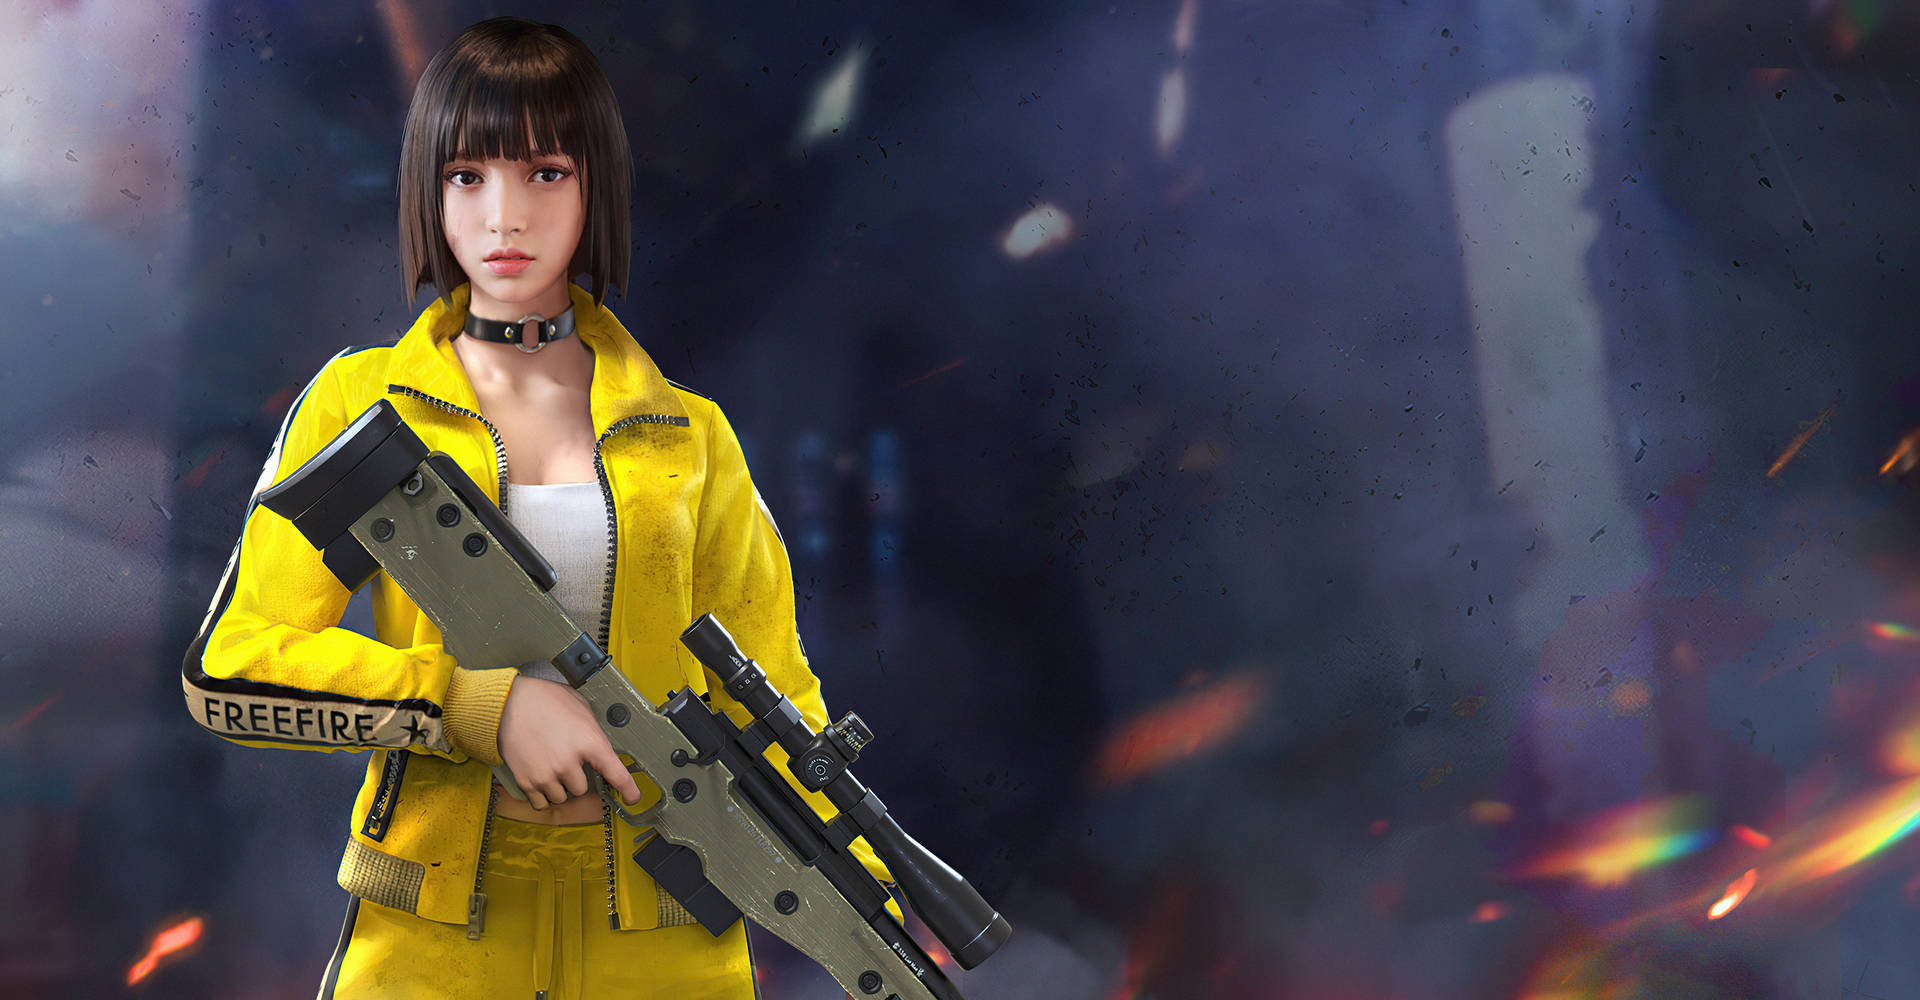 Kelly With Sniper Rifle Free Fire Desktop